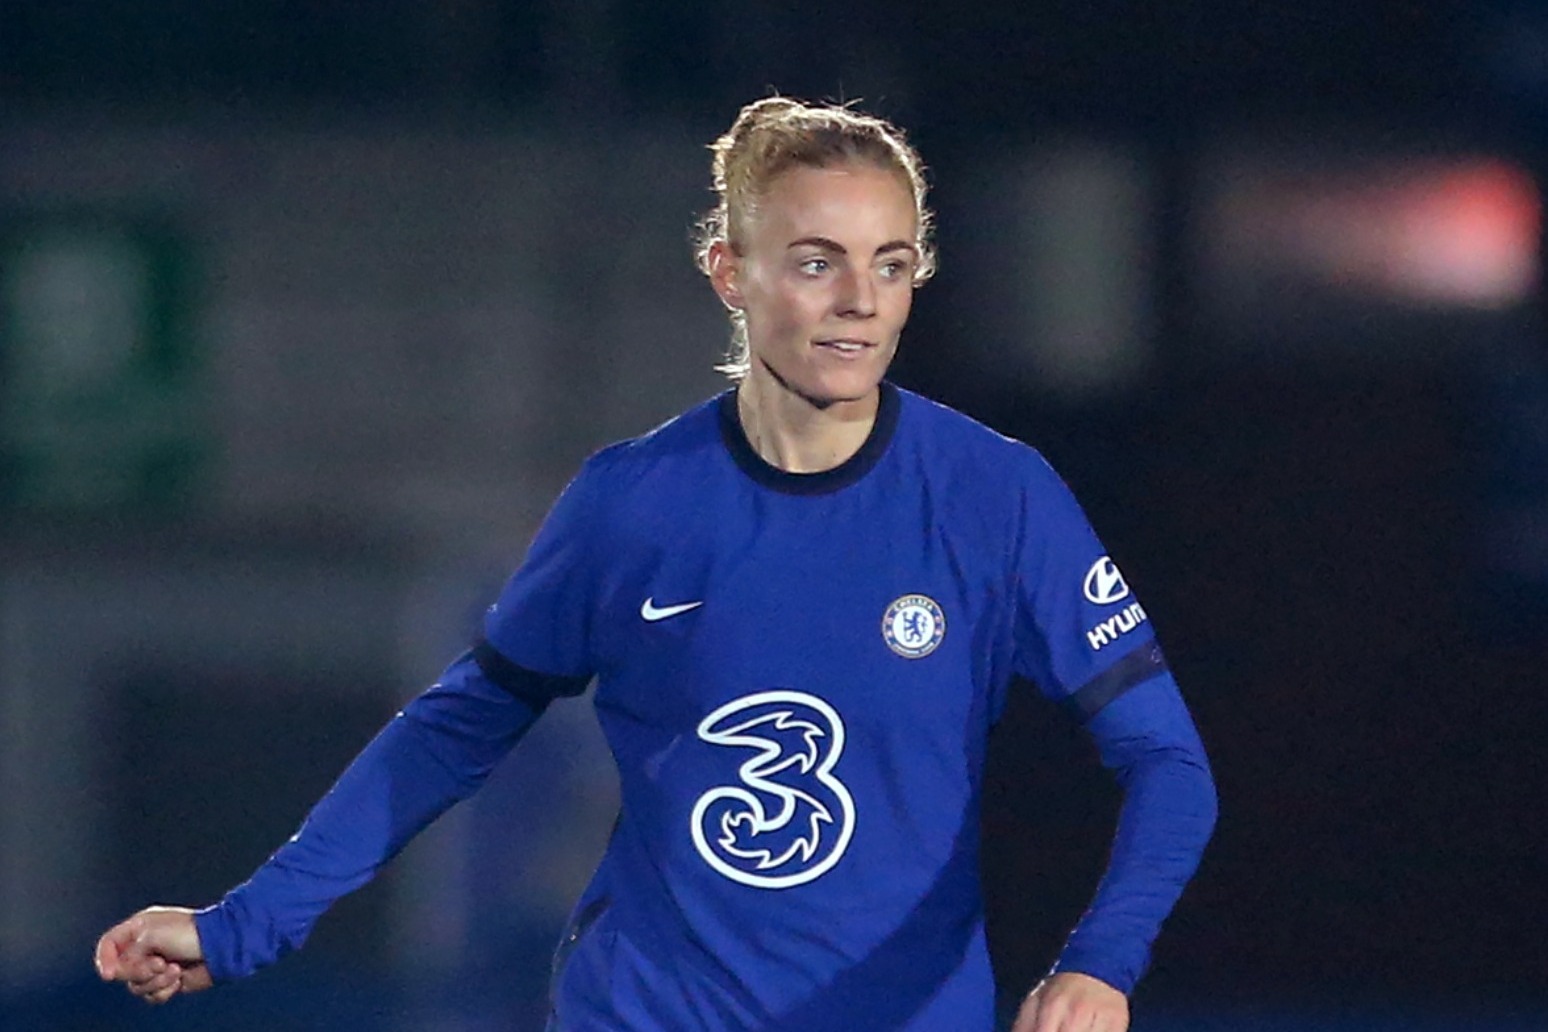 Wales skipper Sophie Ingle signs two-year extension at Chelsea 